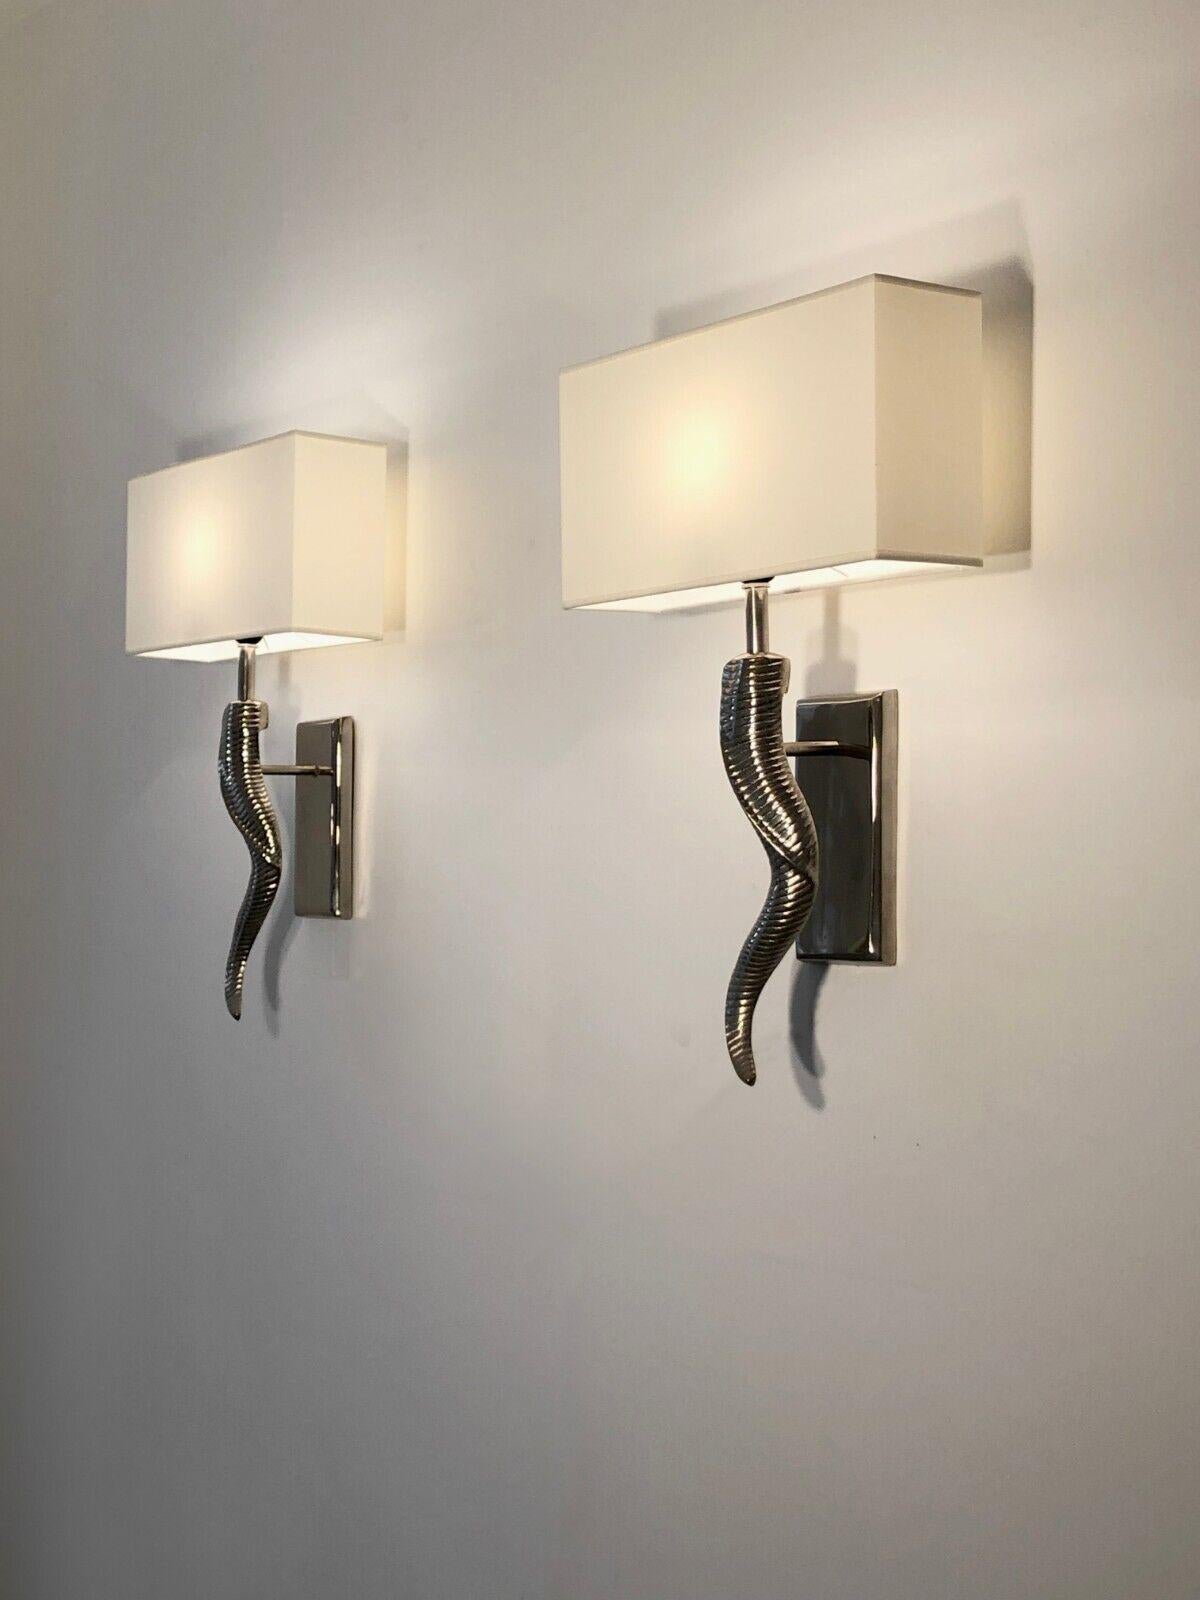 A spectacular and sculptural pair of wall appliques in form of the Horn, in polished aluminum, Shabby-Chic, Neoclassical; impressive organic Horn-like body in polished metal suspended on two rectangular bases, holding two rectangular shadows. To be